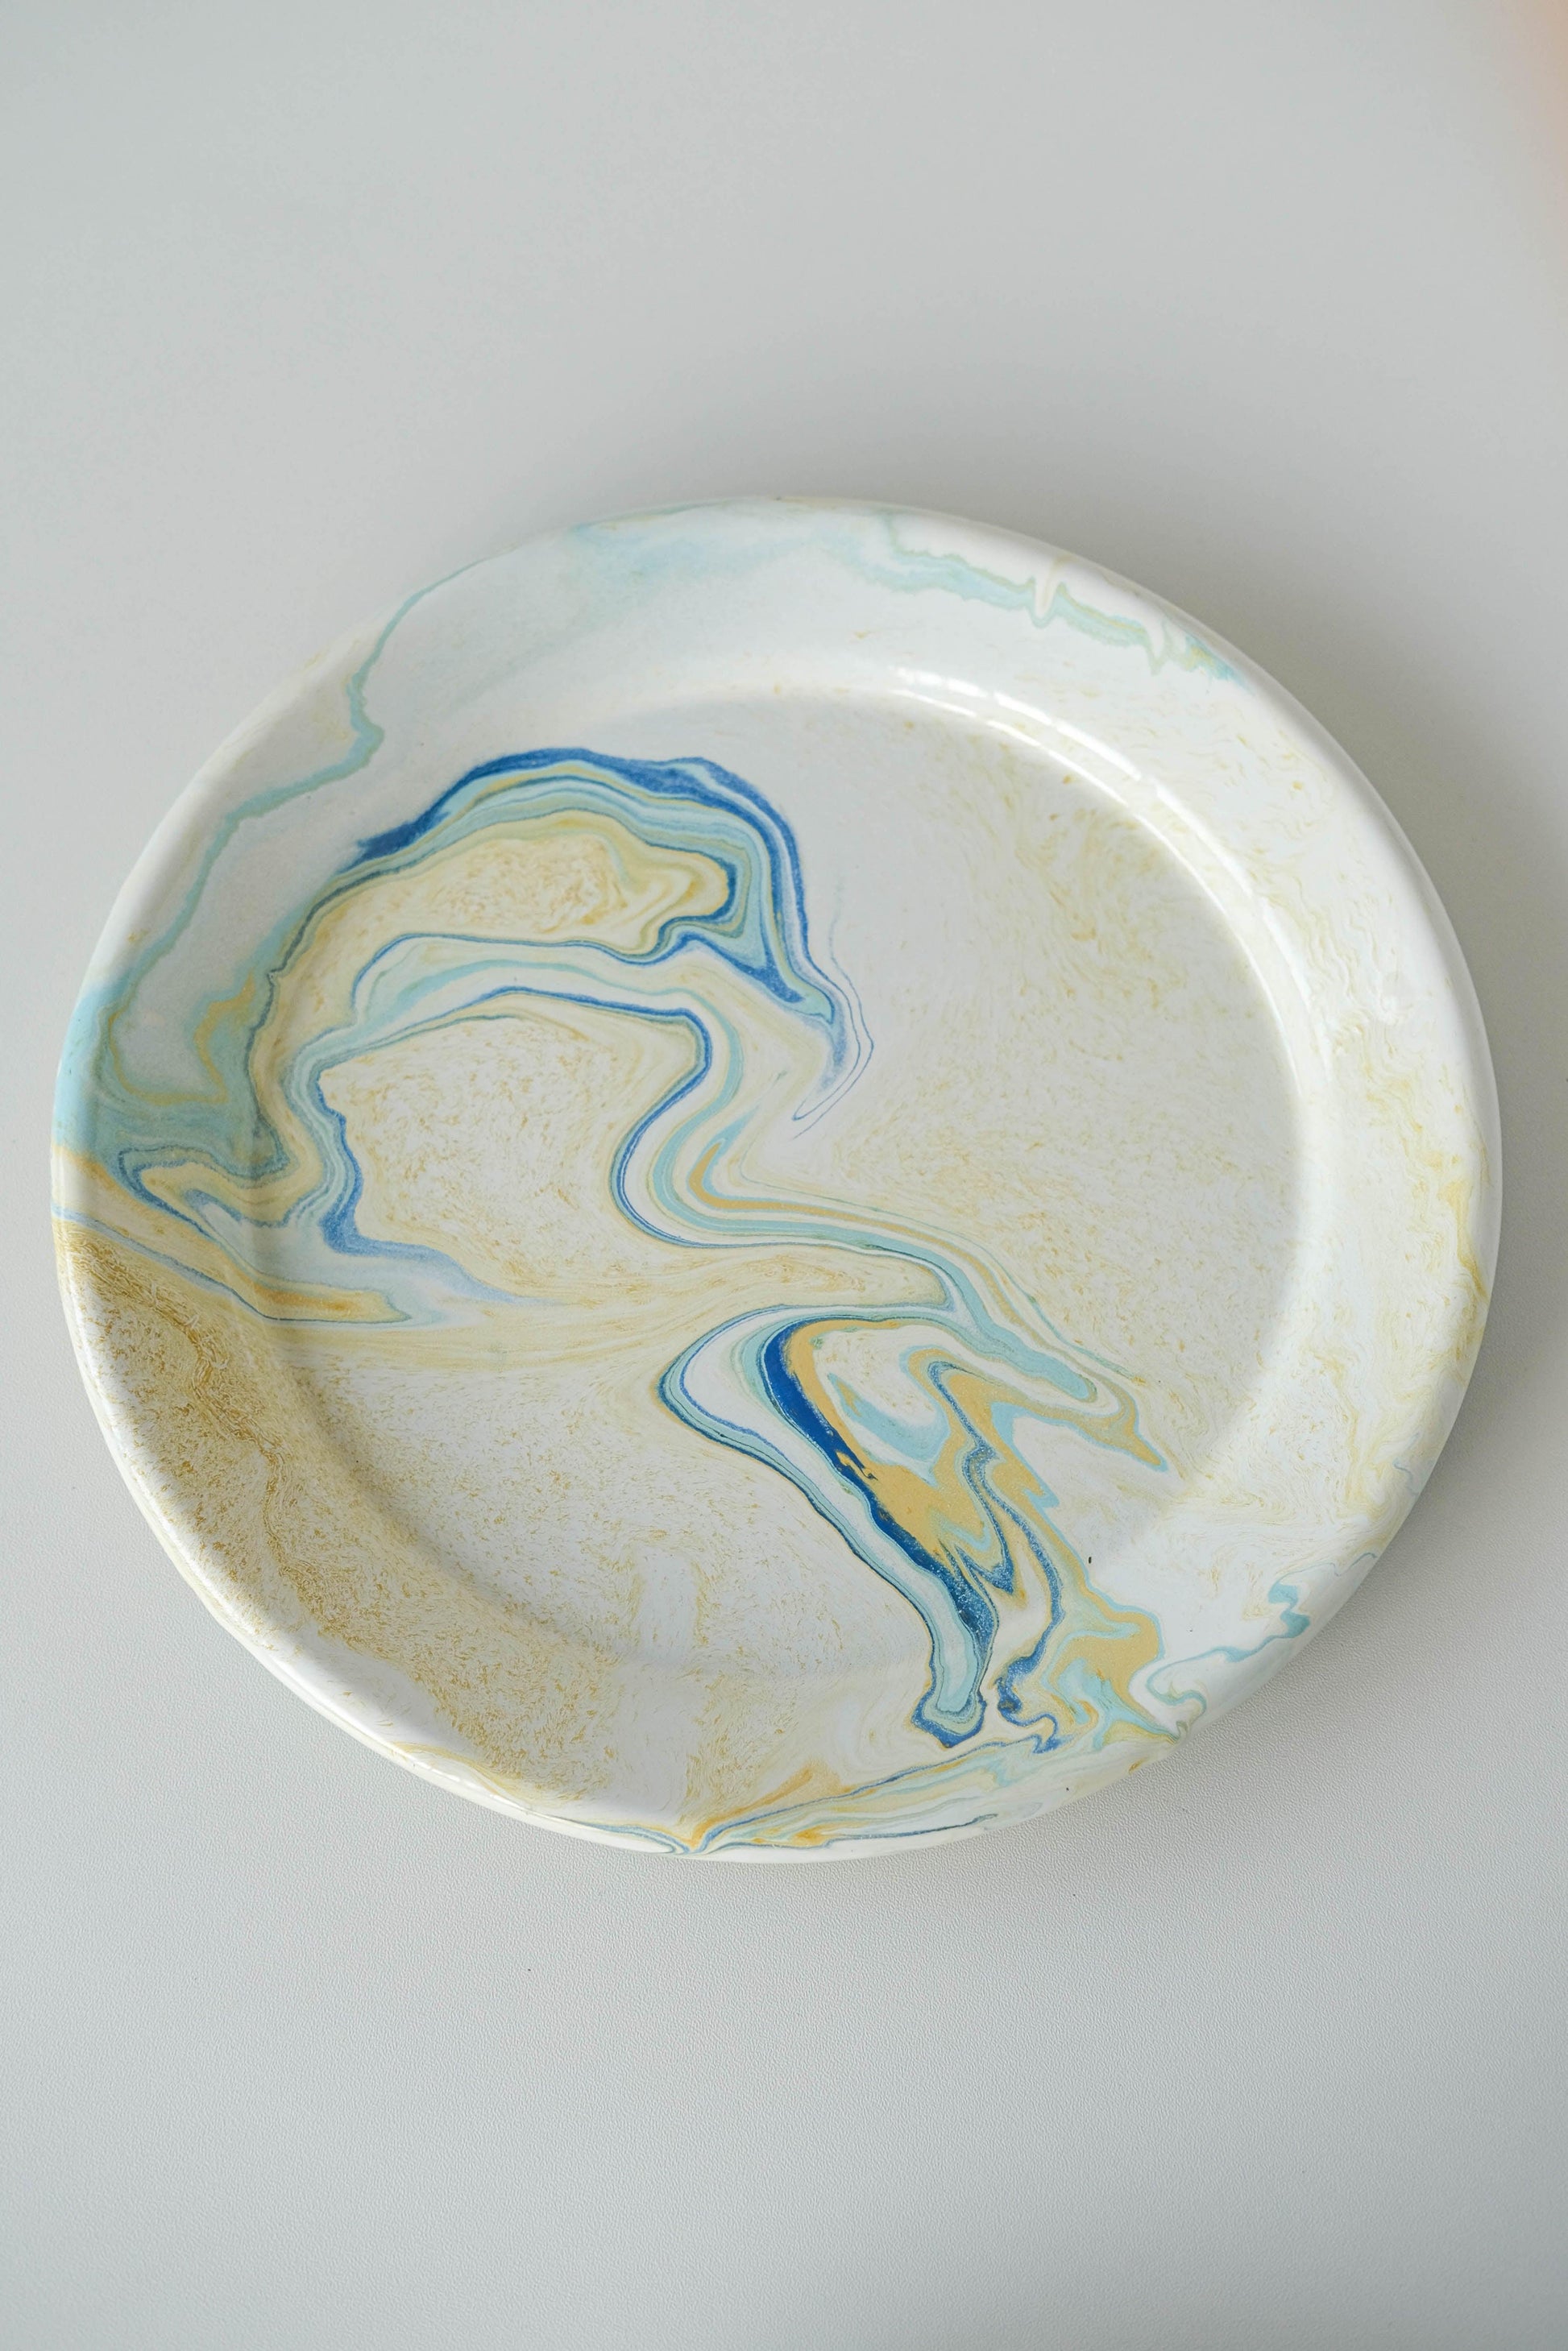 Bornn | New Marble Plate - Late Morning